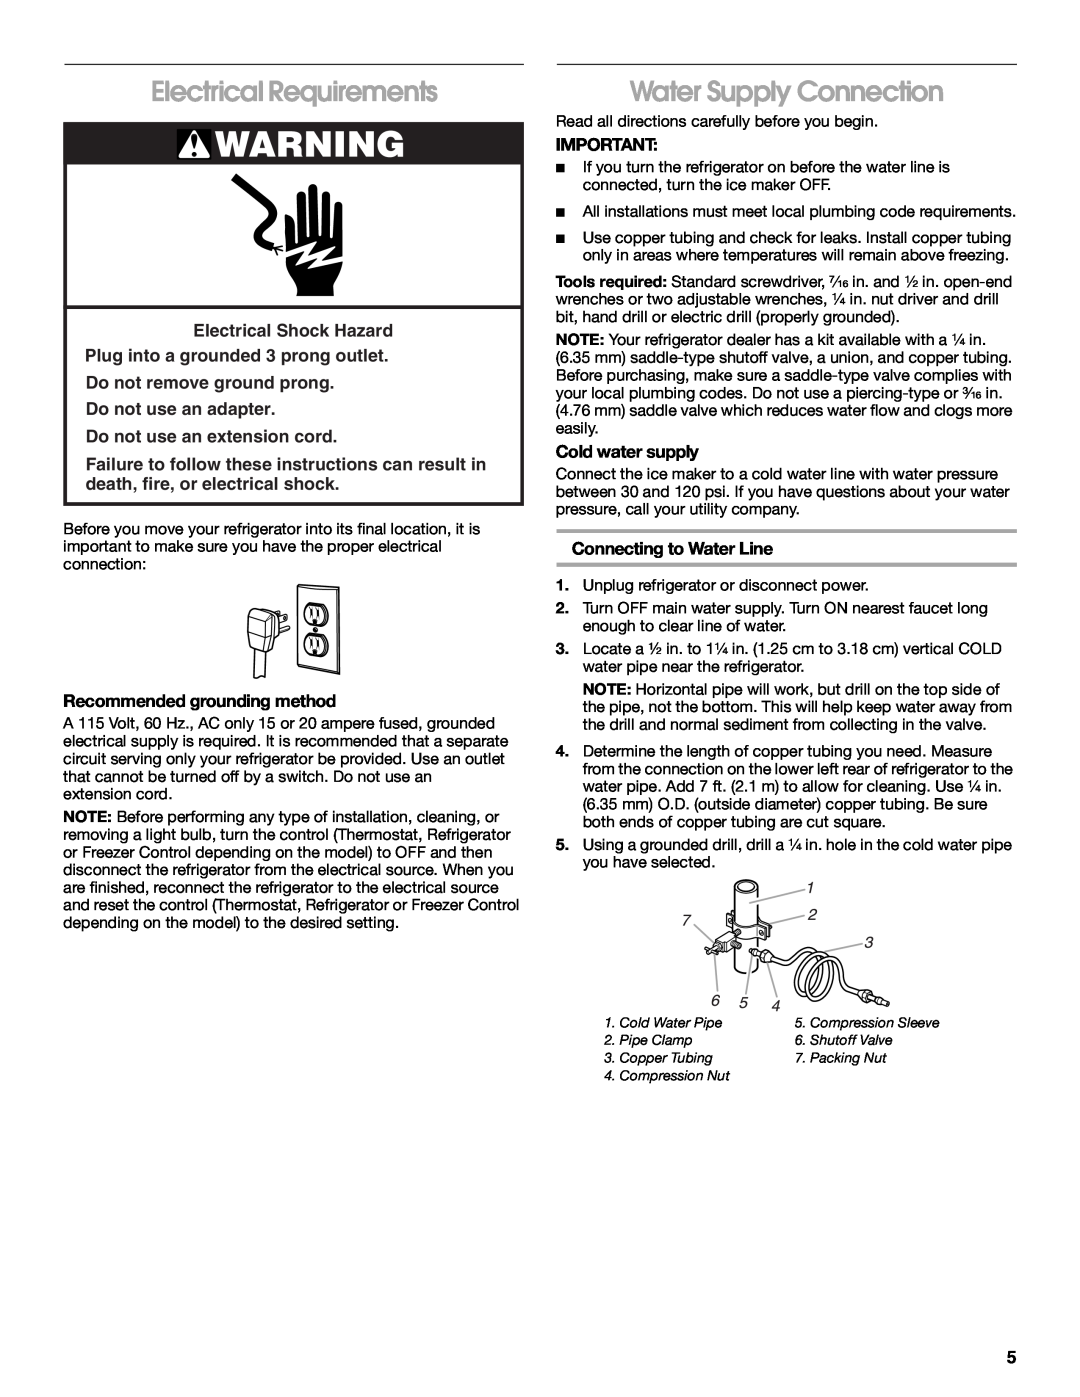 Whirlpool 2225405 manual Electrical Requirements, Water Supply Connection, Do not remove ground prong Do not use an adapter 